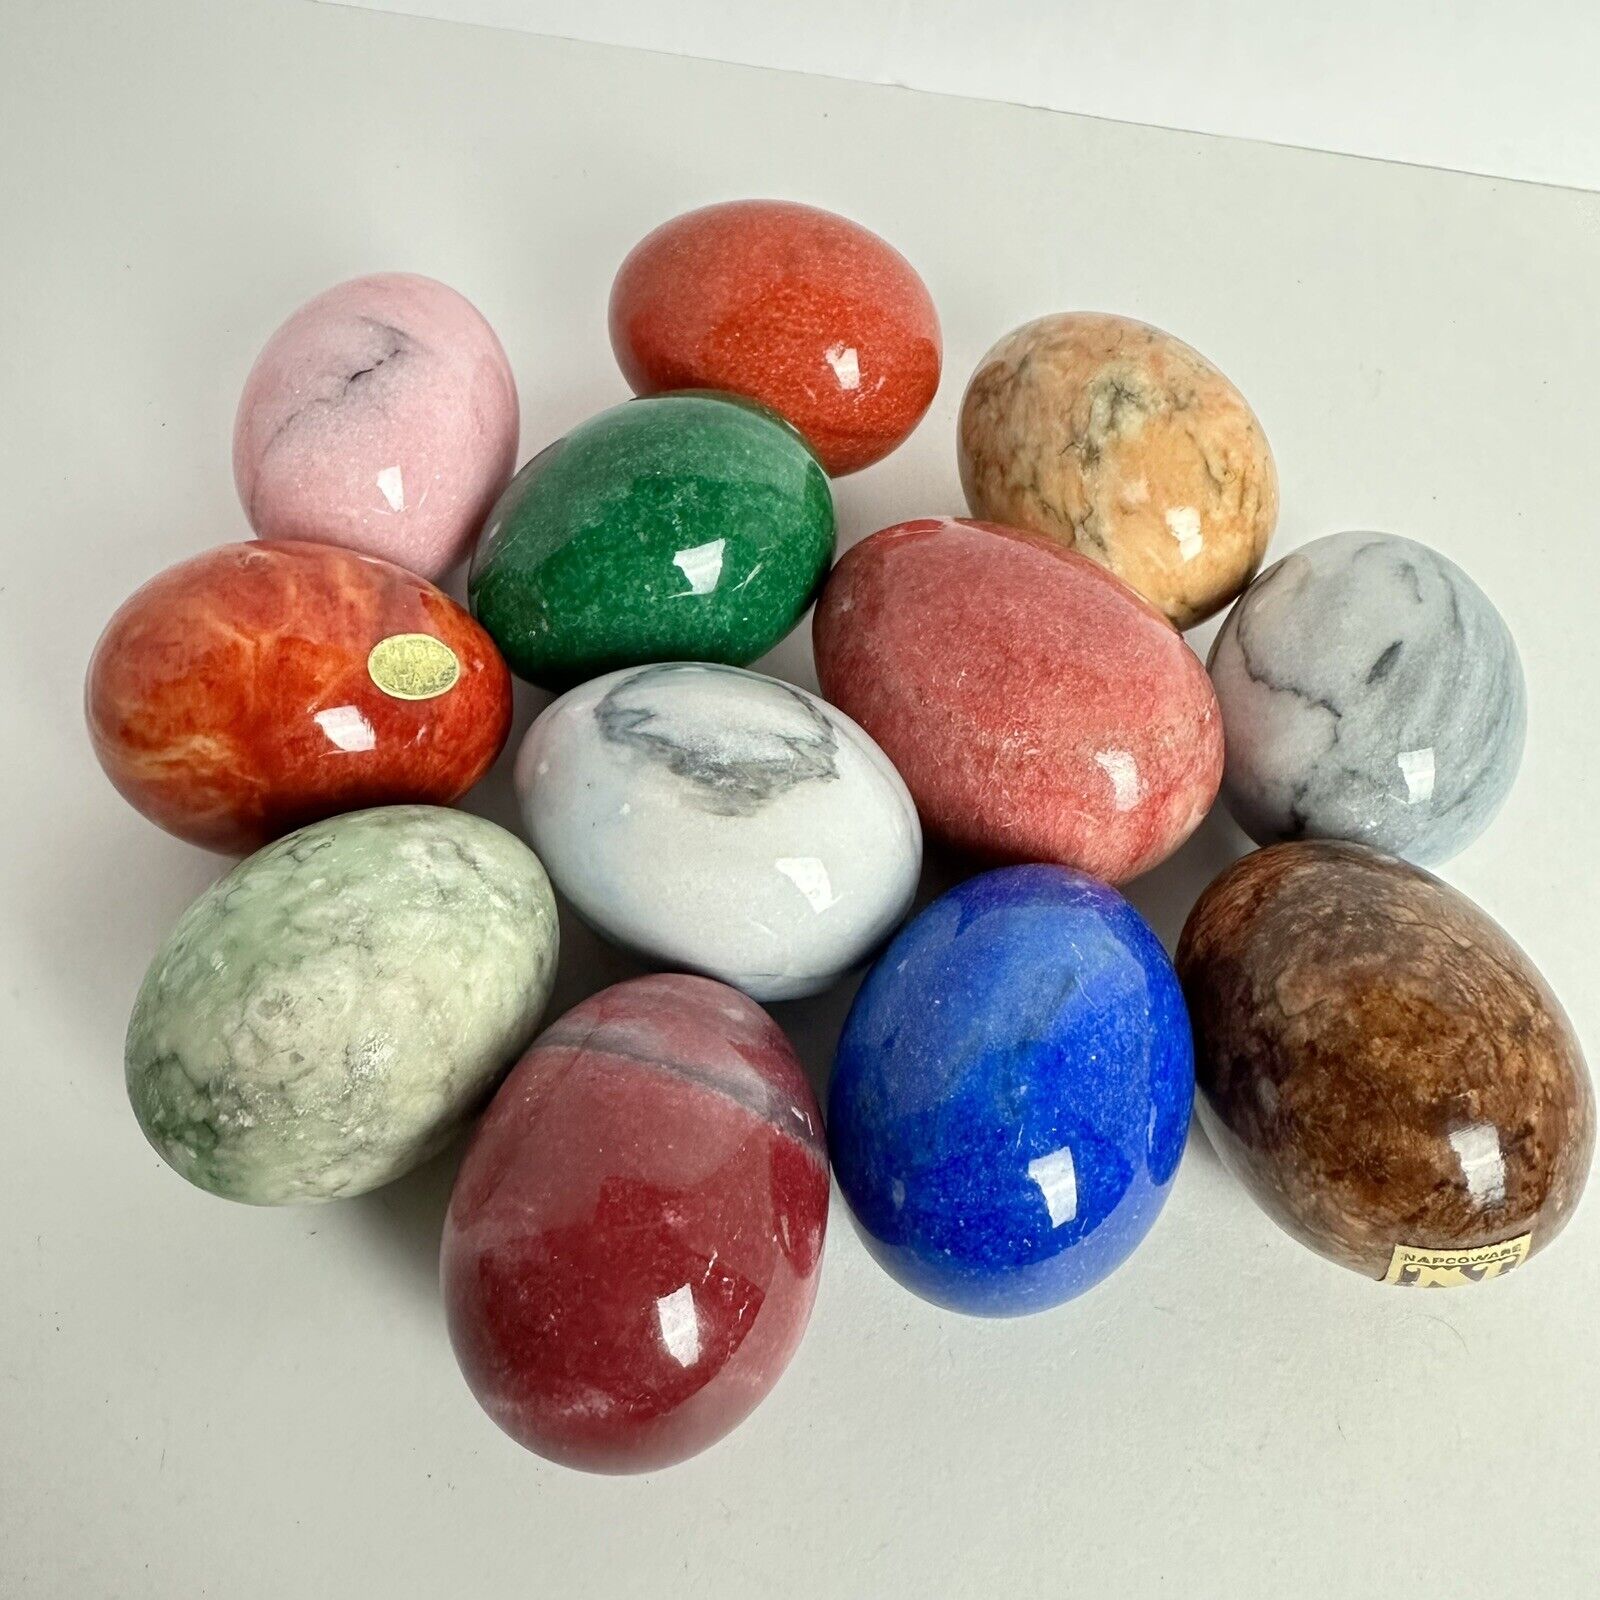 Lot of 12 Assorted Genuine Alabaster Marble Stone Italy Eggs Multi Bright Colors